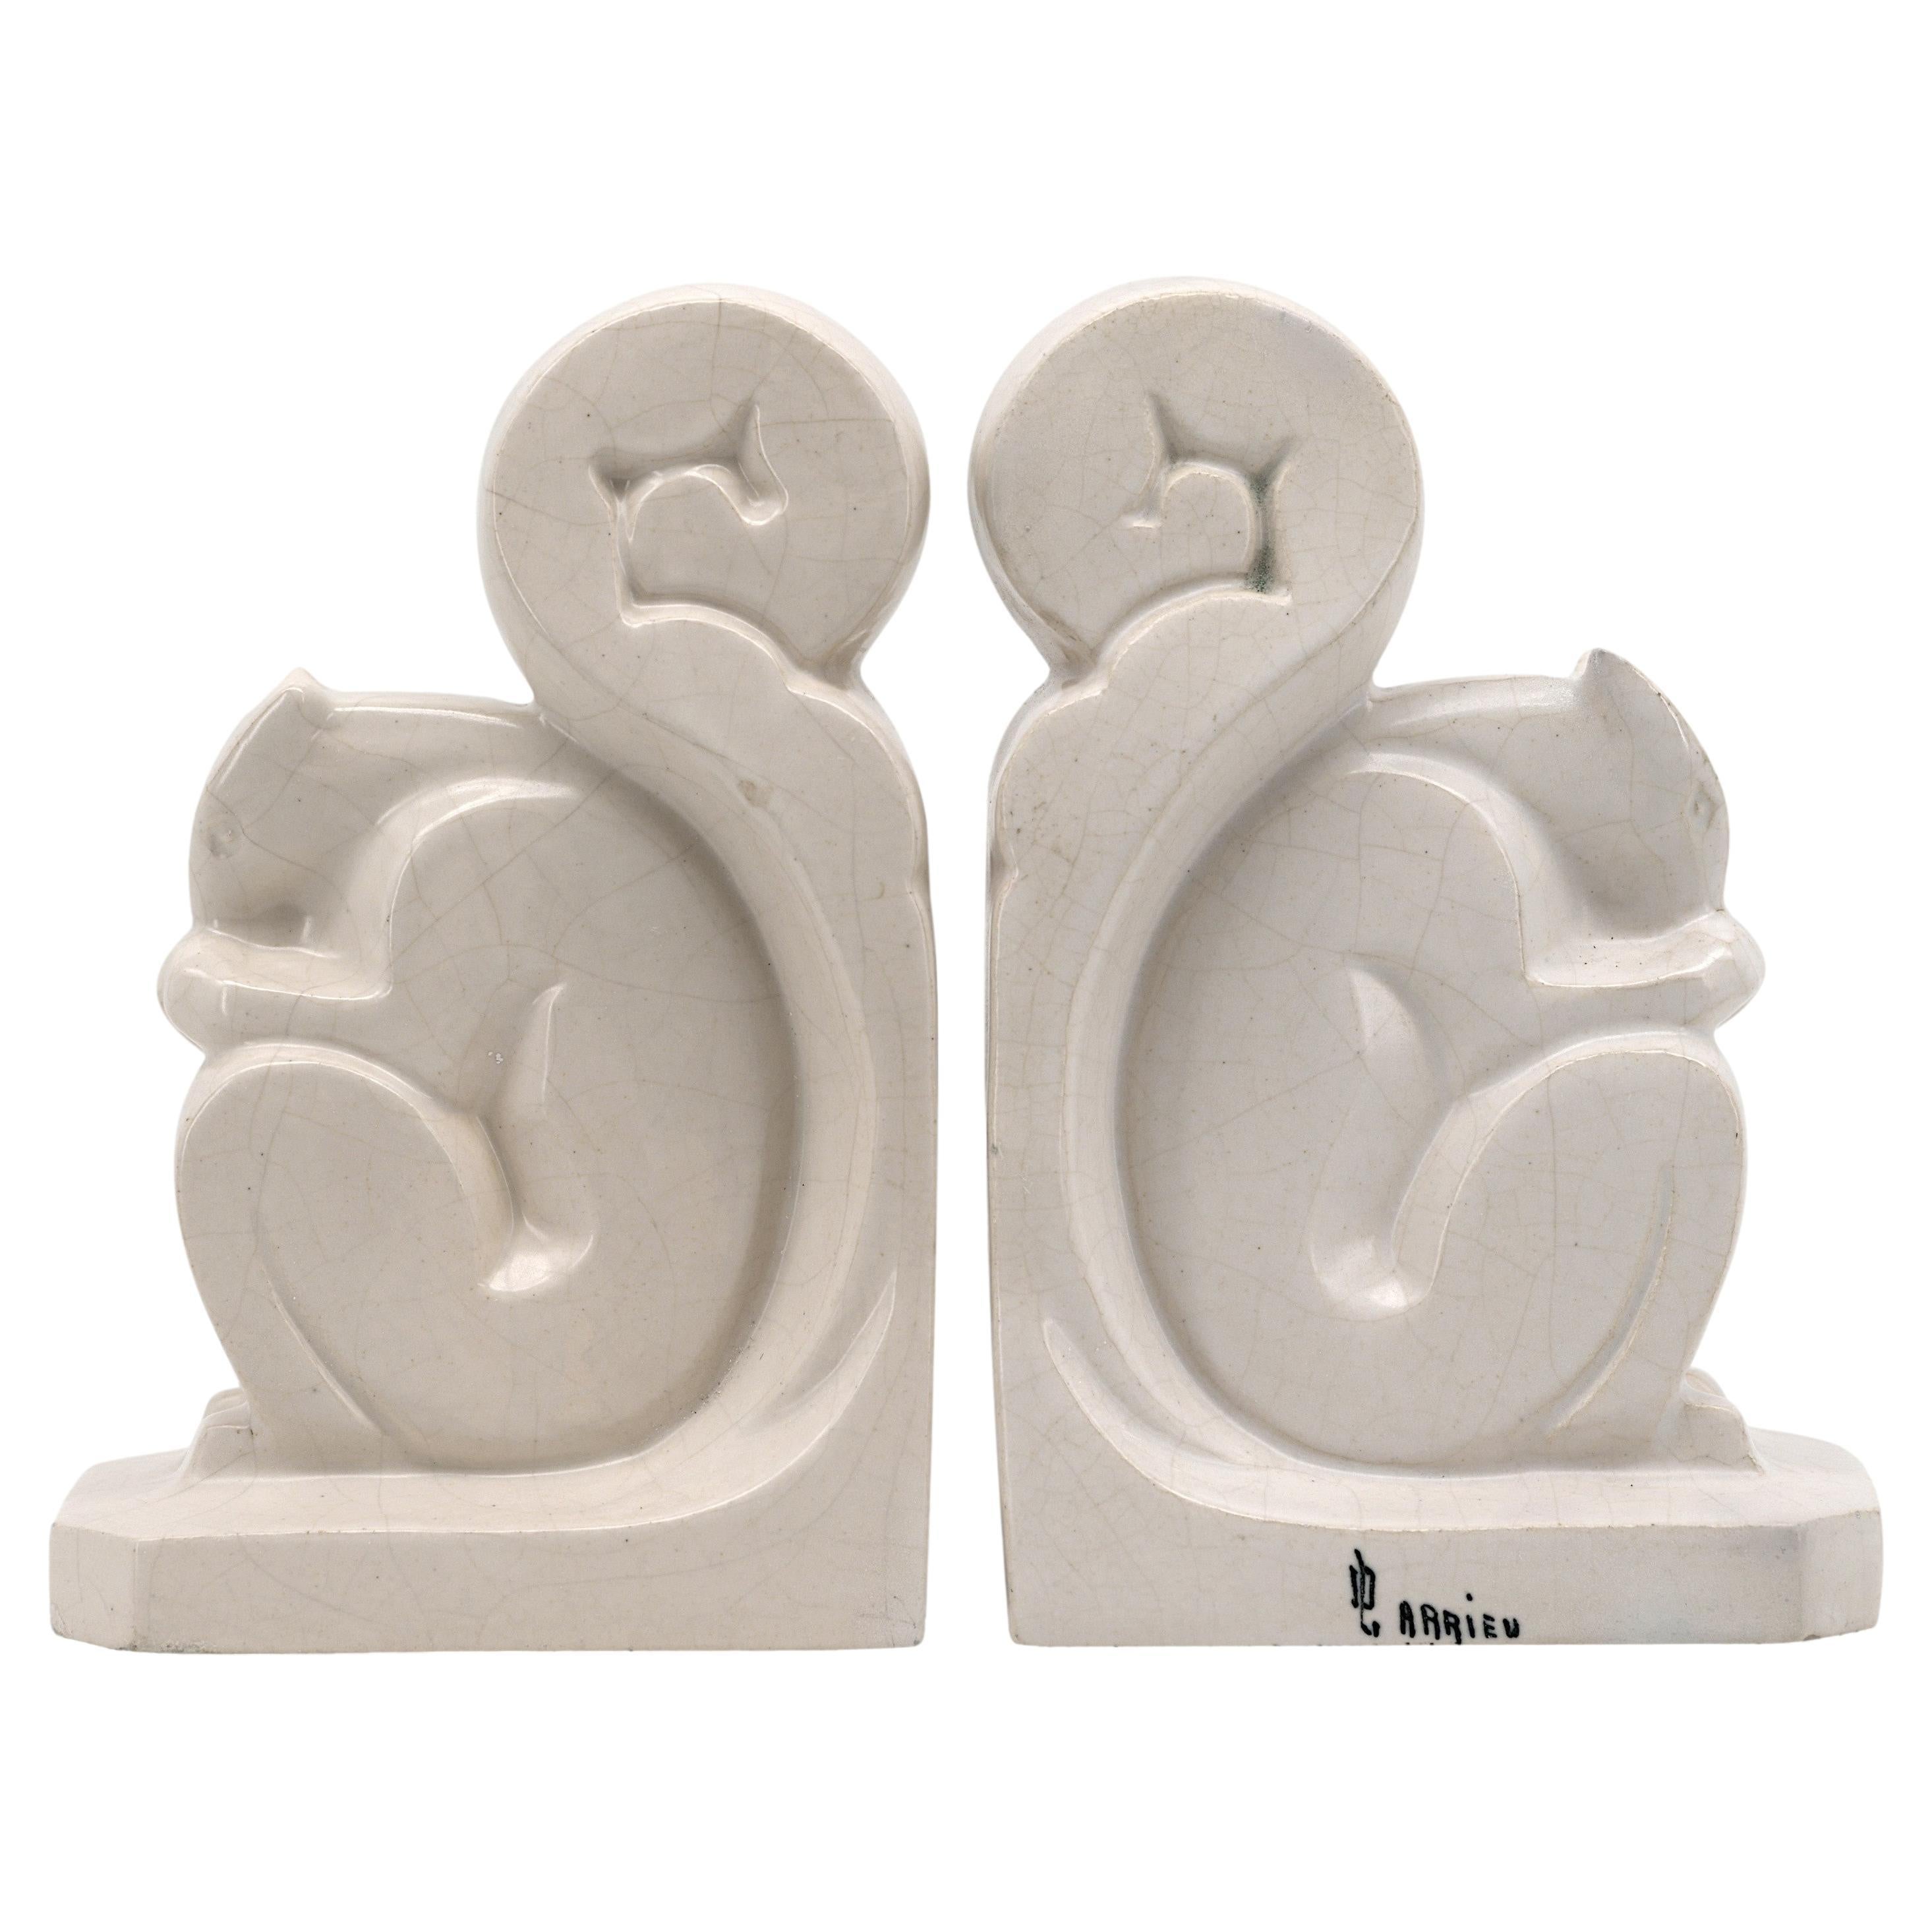 Octave LARRIEU French Art Deco Squirrel Bookends Pair, 1930s For Sale